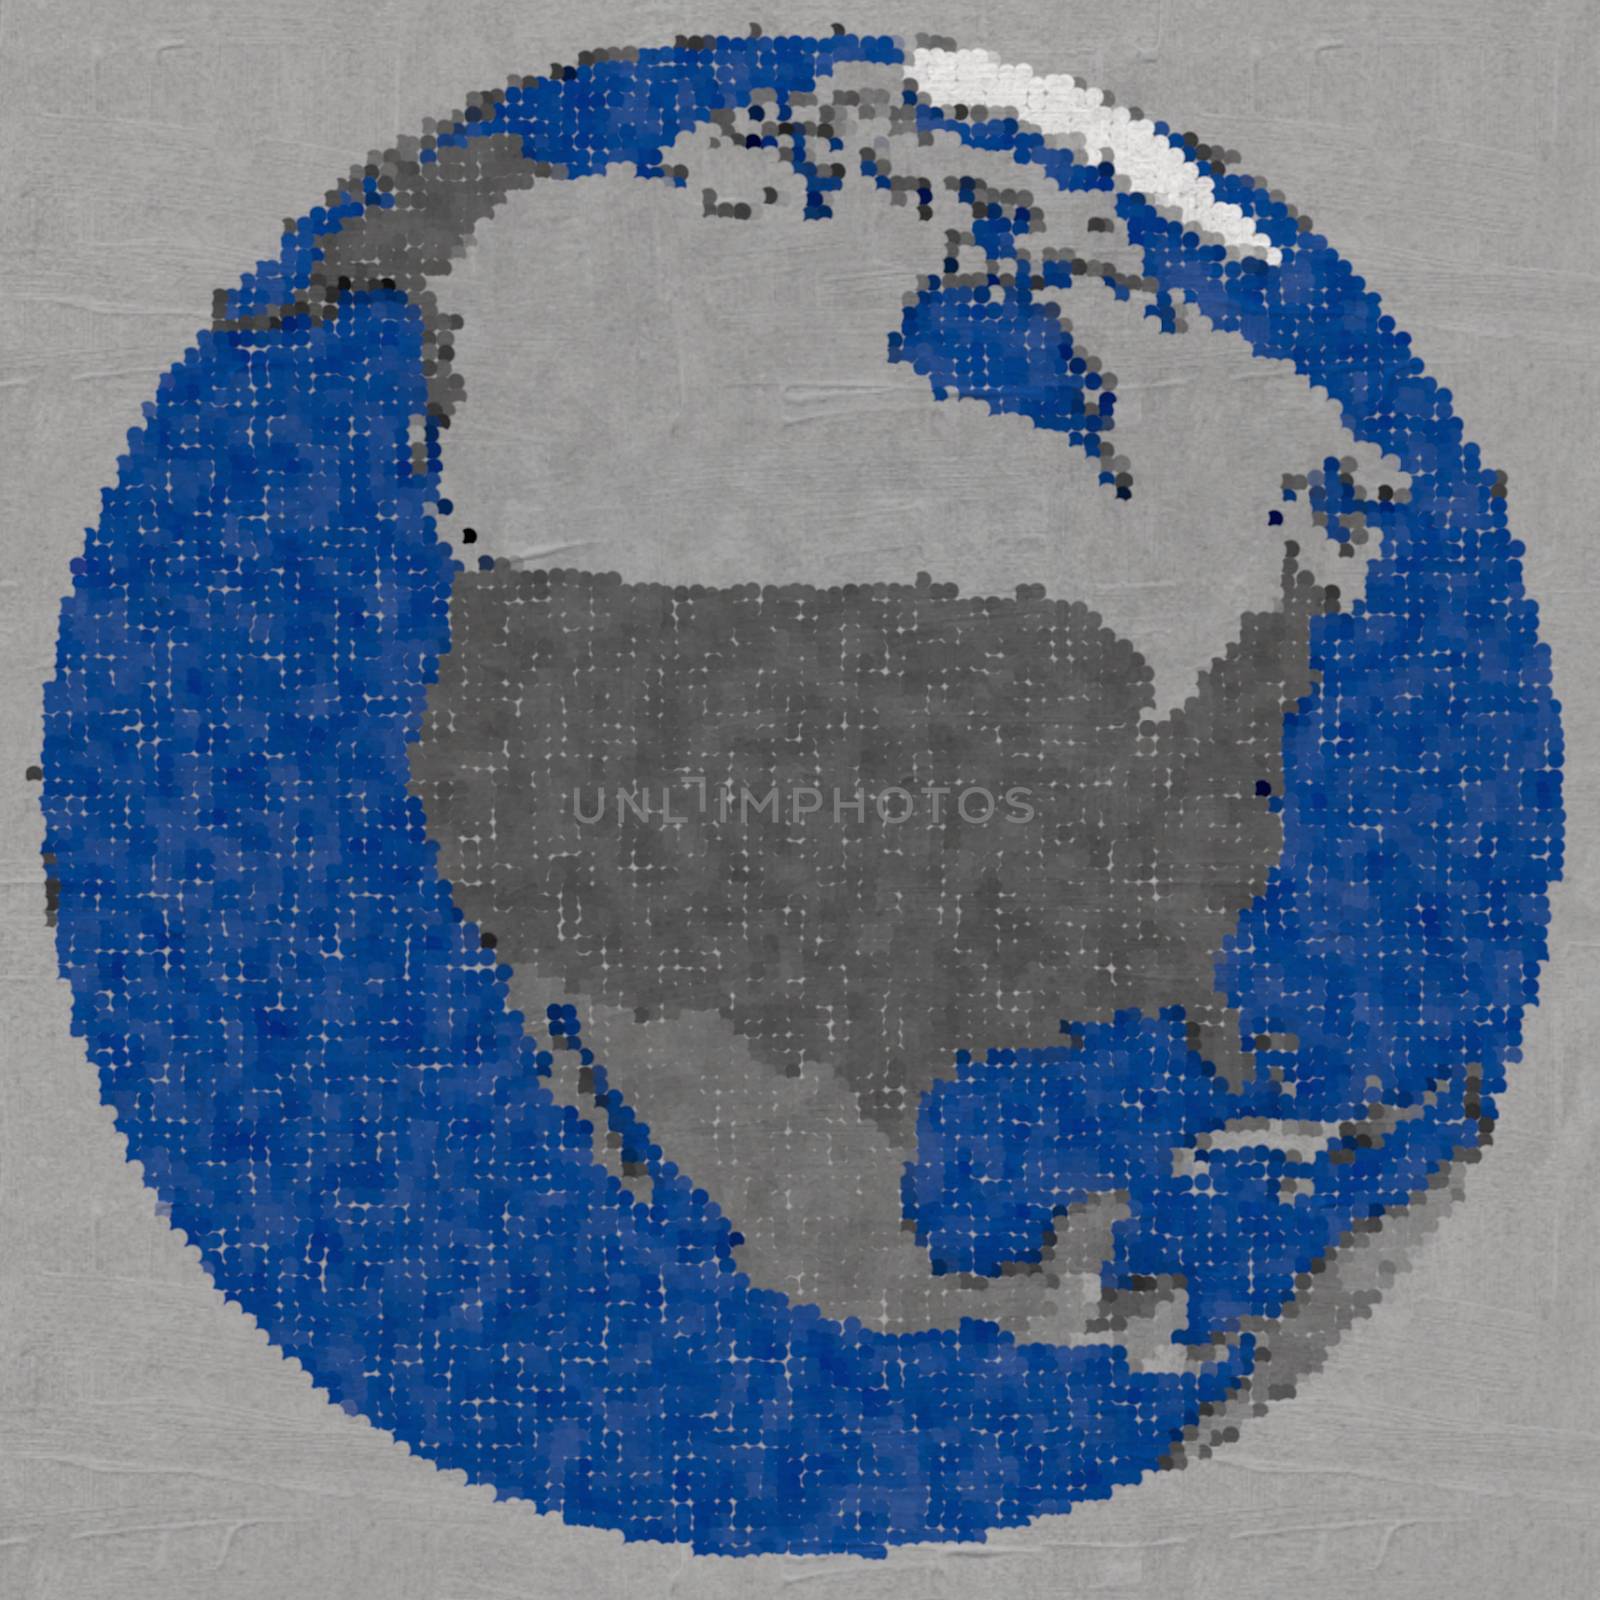 Drawing of north America on globe, dotted illustration